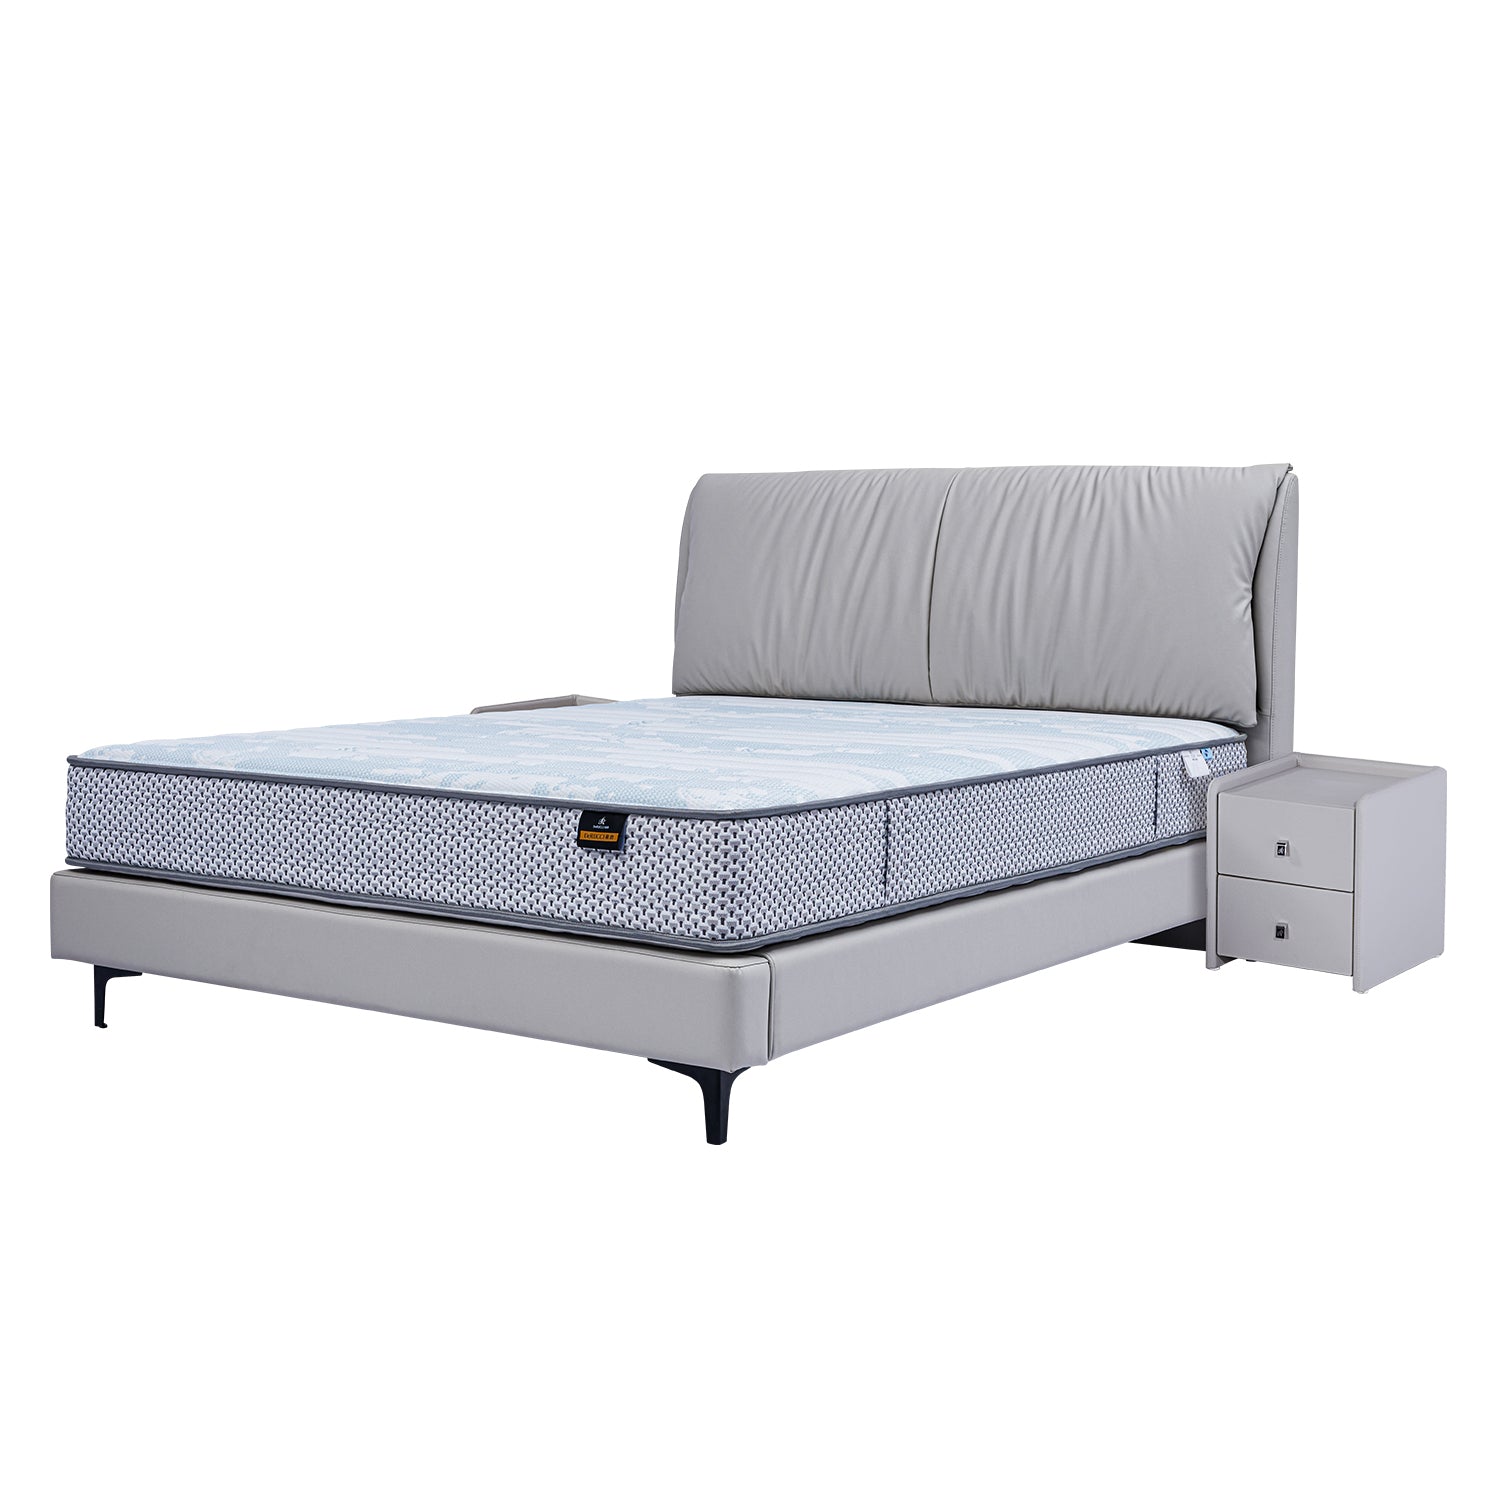 DeRUCCI Bed Frame BOC1 - 012 in grey with cushioned headboard and matching mattress, accompanied by a grey bedside table with two drawers